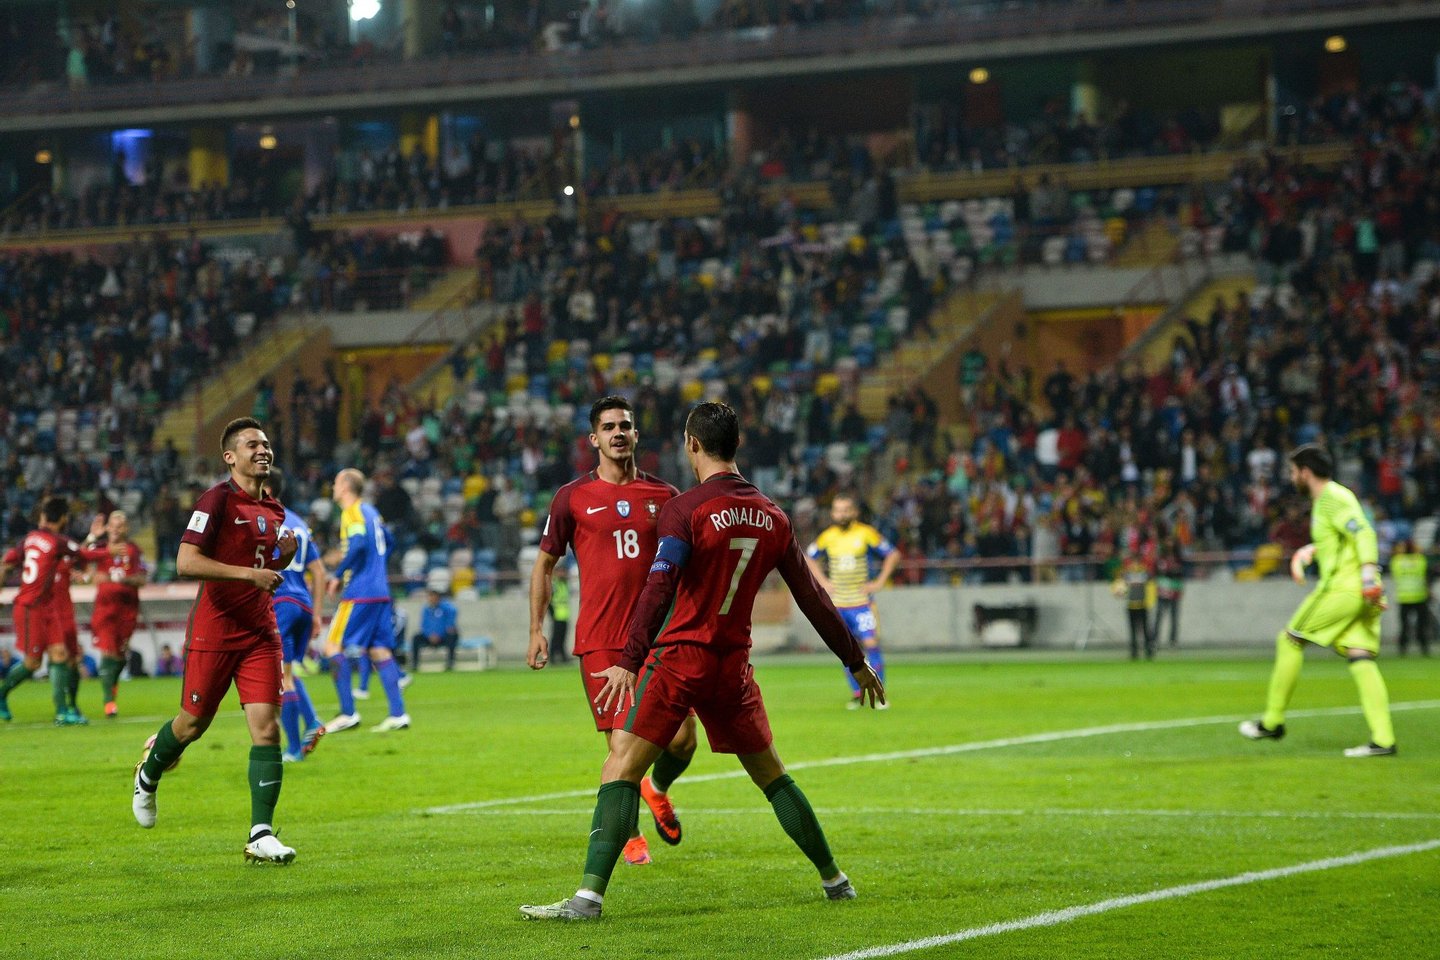 Portugal's forward Cristiano Ronaldo (C) celebrates with his teammates after scoring a goal during the WC 2018 football qualification match between Portugal and Andorra at the Municipal de Arouca stadium in Aveiro on October 7, 2016. / AFP / PATRICIA DE MELO MOREIRA (Photo credit should read PATRICIA DE MELO MOREIRA/AFP/Getty Images)